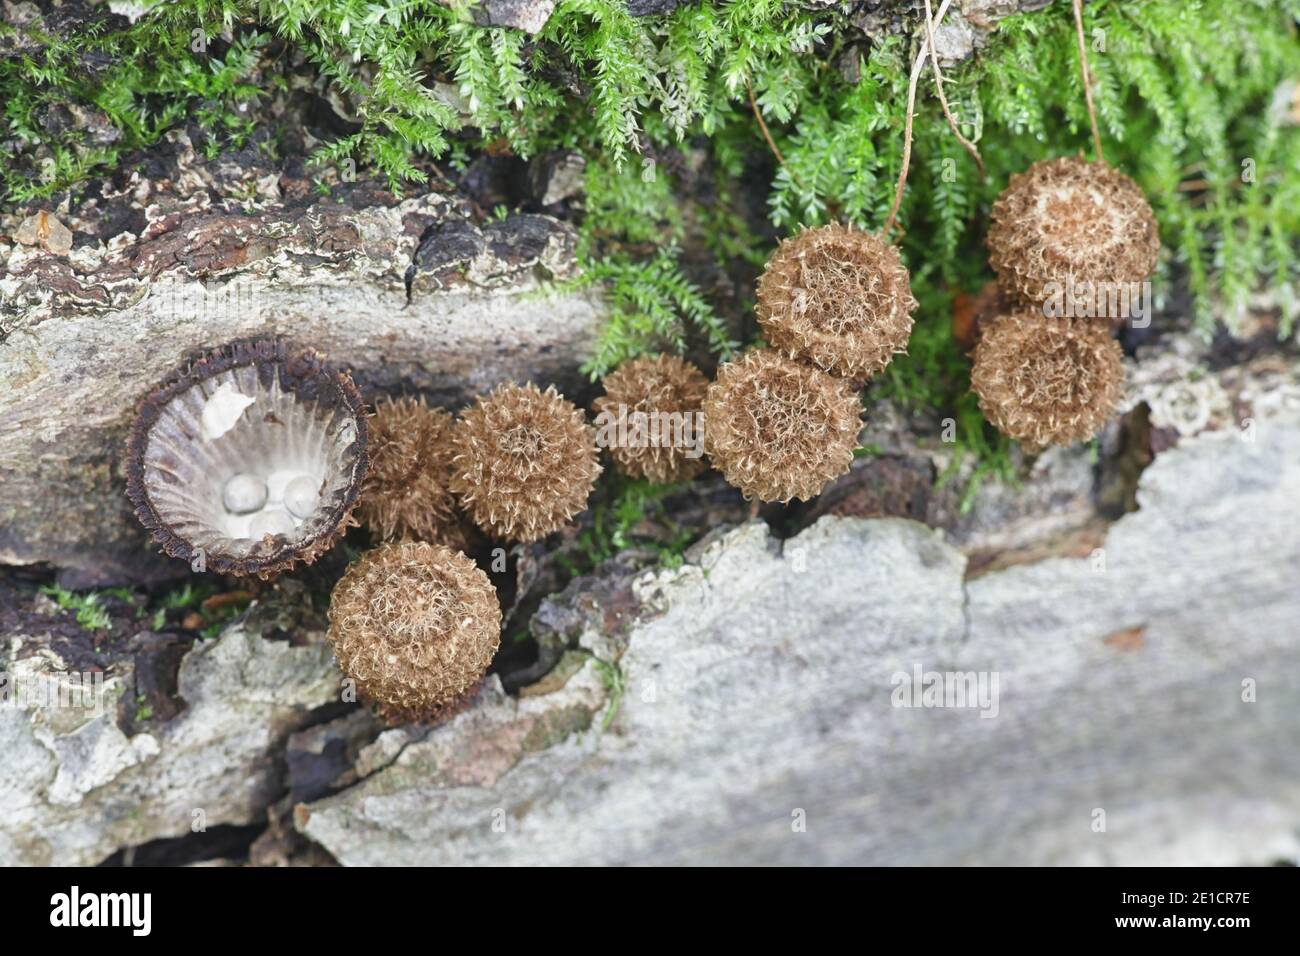 Cyathus striatus, known as the fluted bird's nest fungus or splash cup, mushrooms from Finland Stock Photo